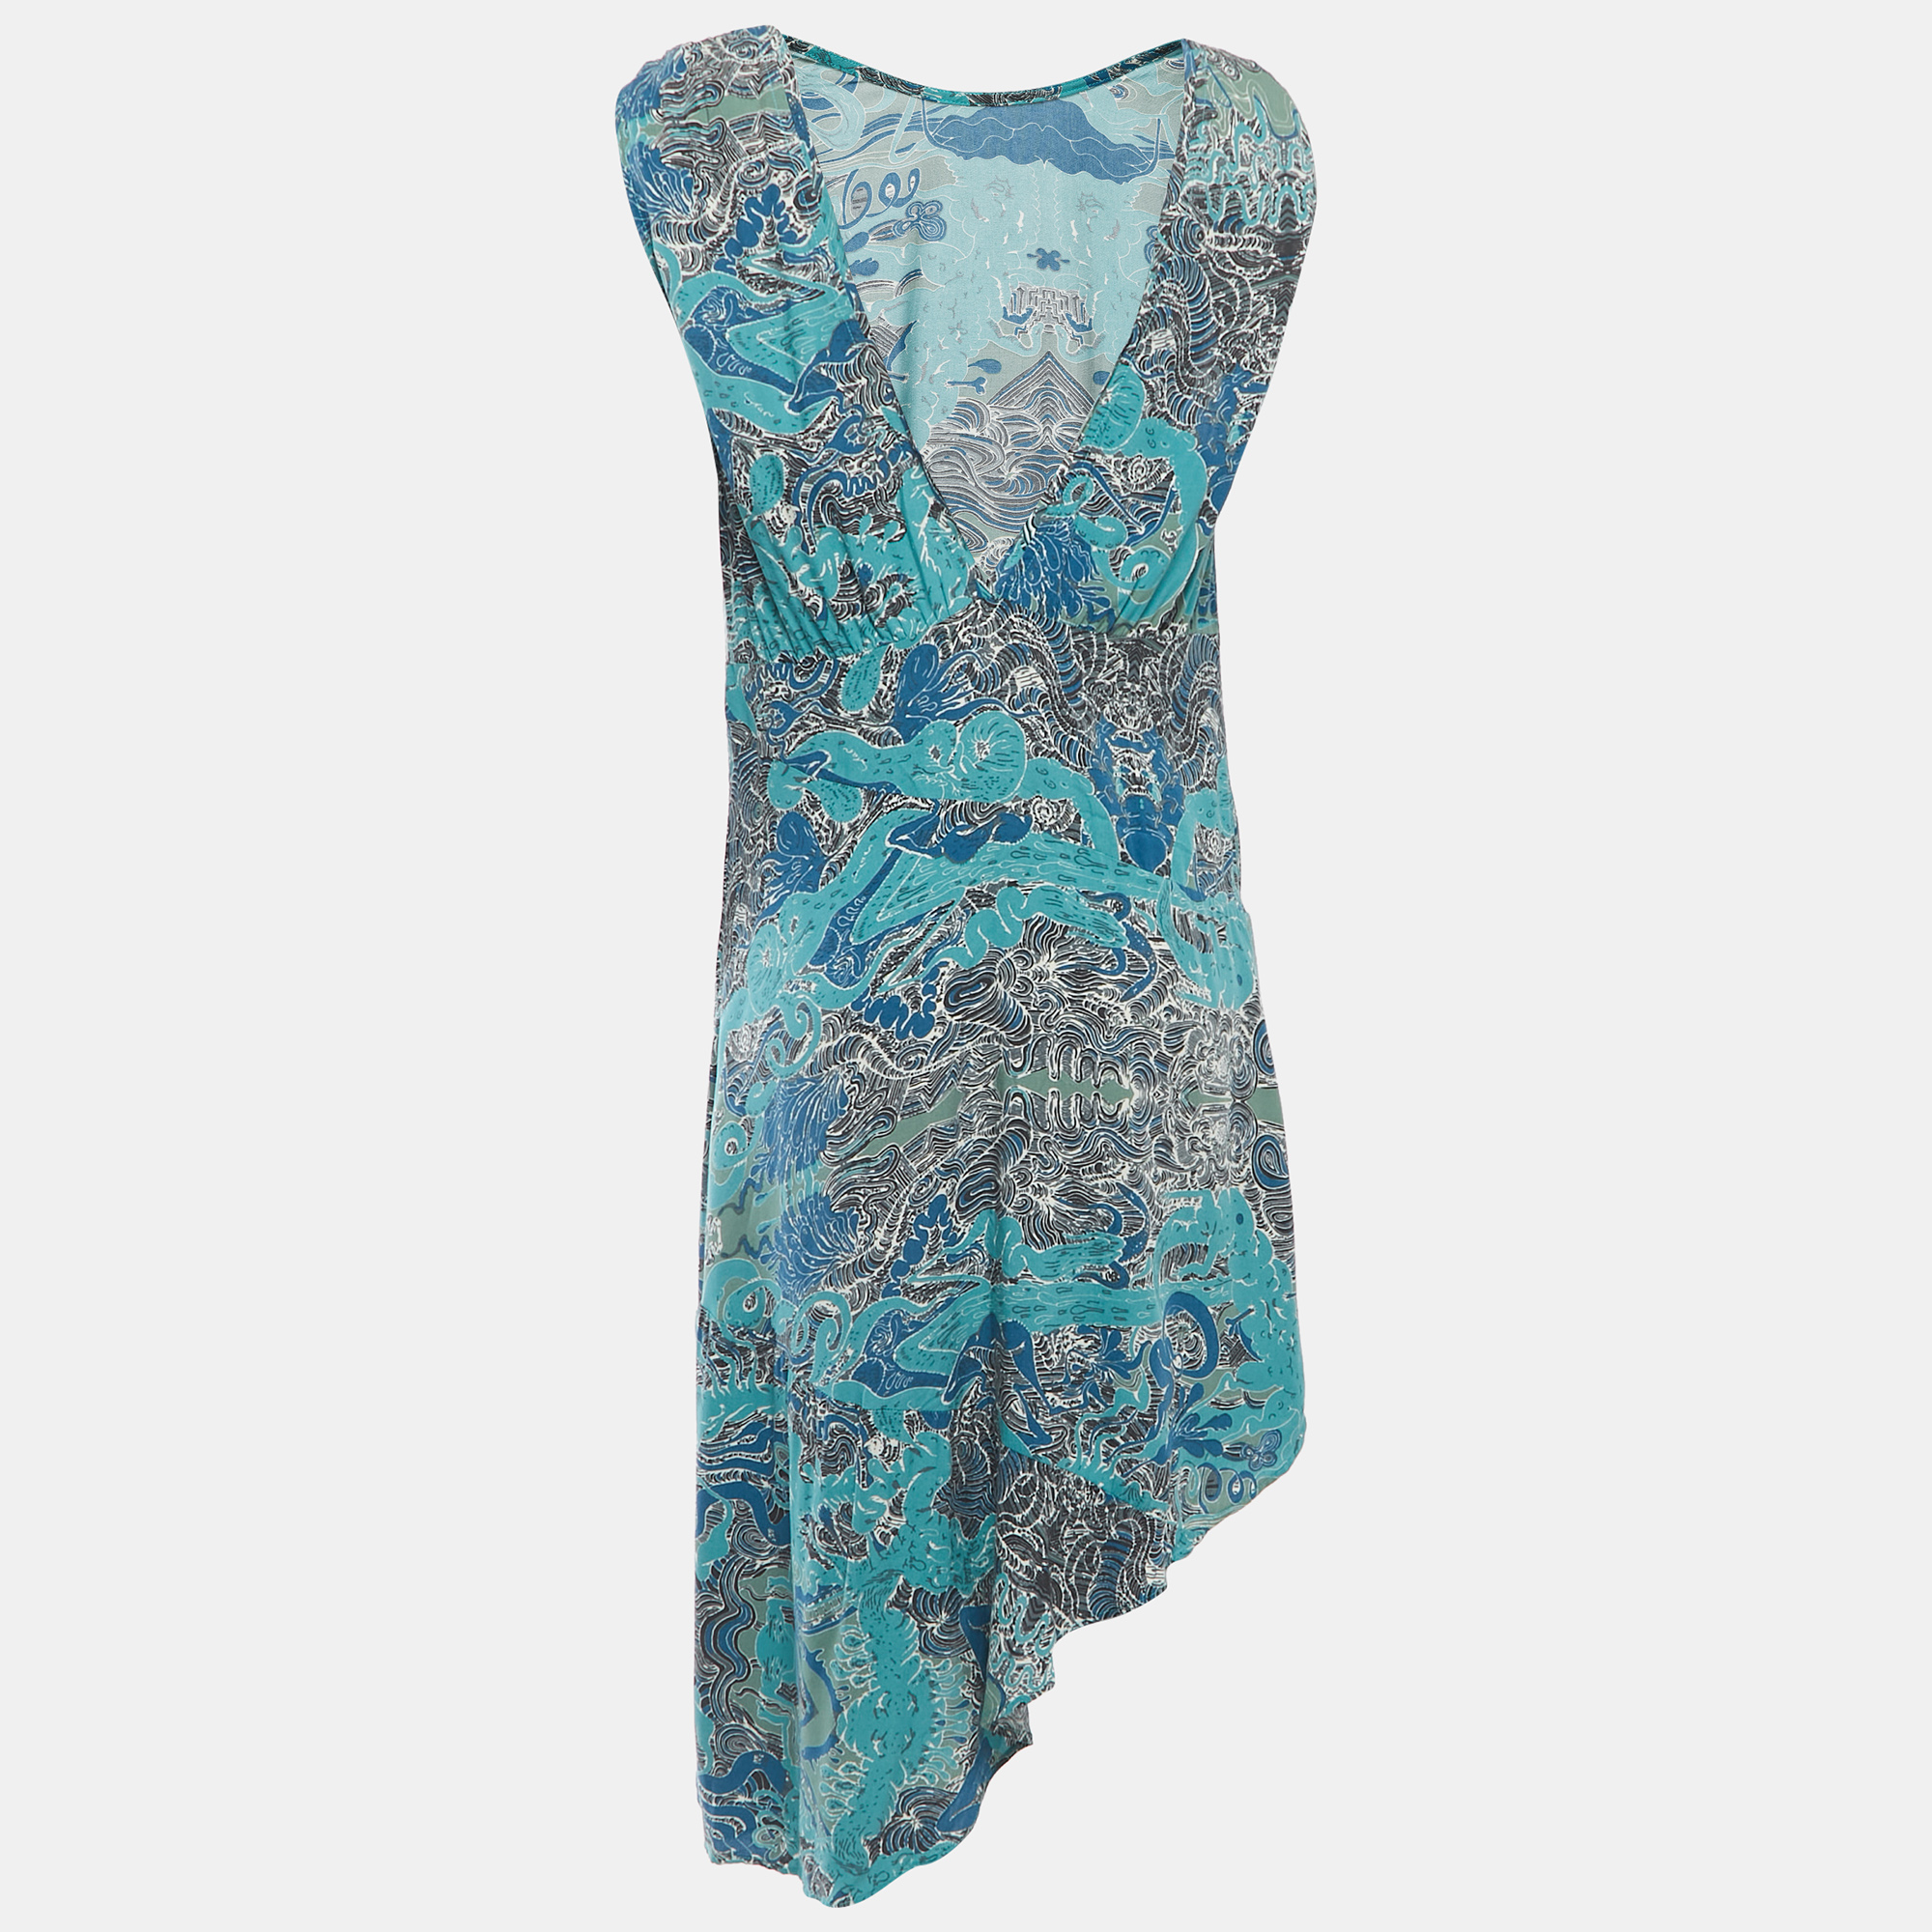 Zadig & Voltaire Blue Root Print Raw Edge Detailed Asymmetrical Sleeveless Dress S